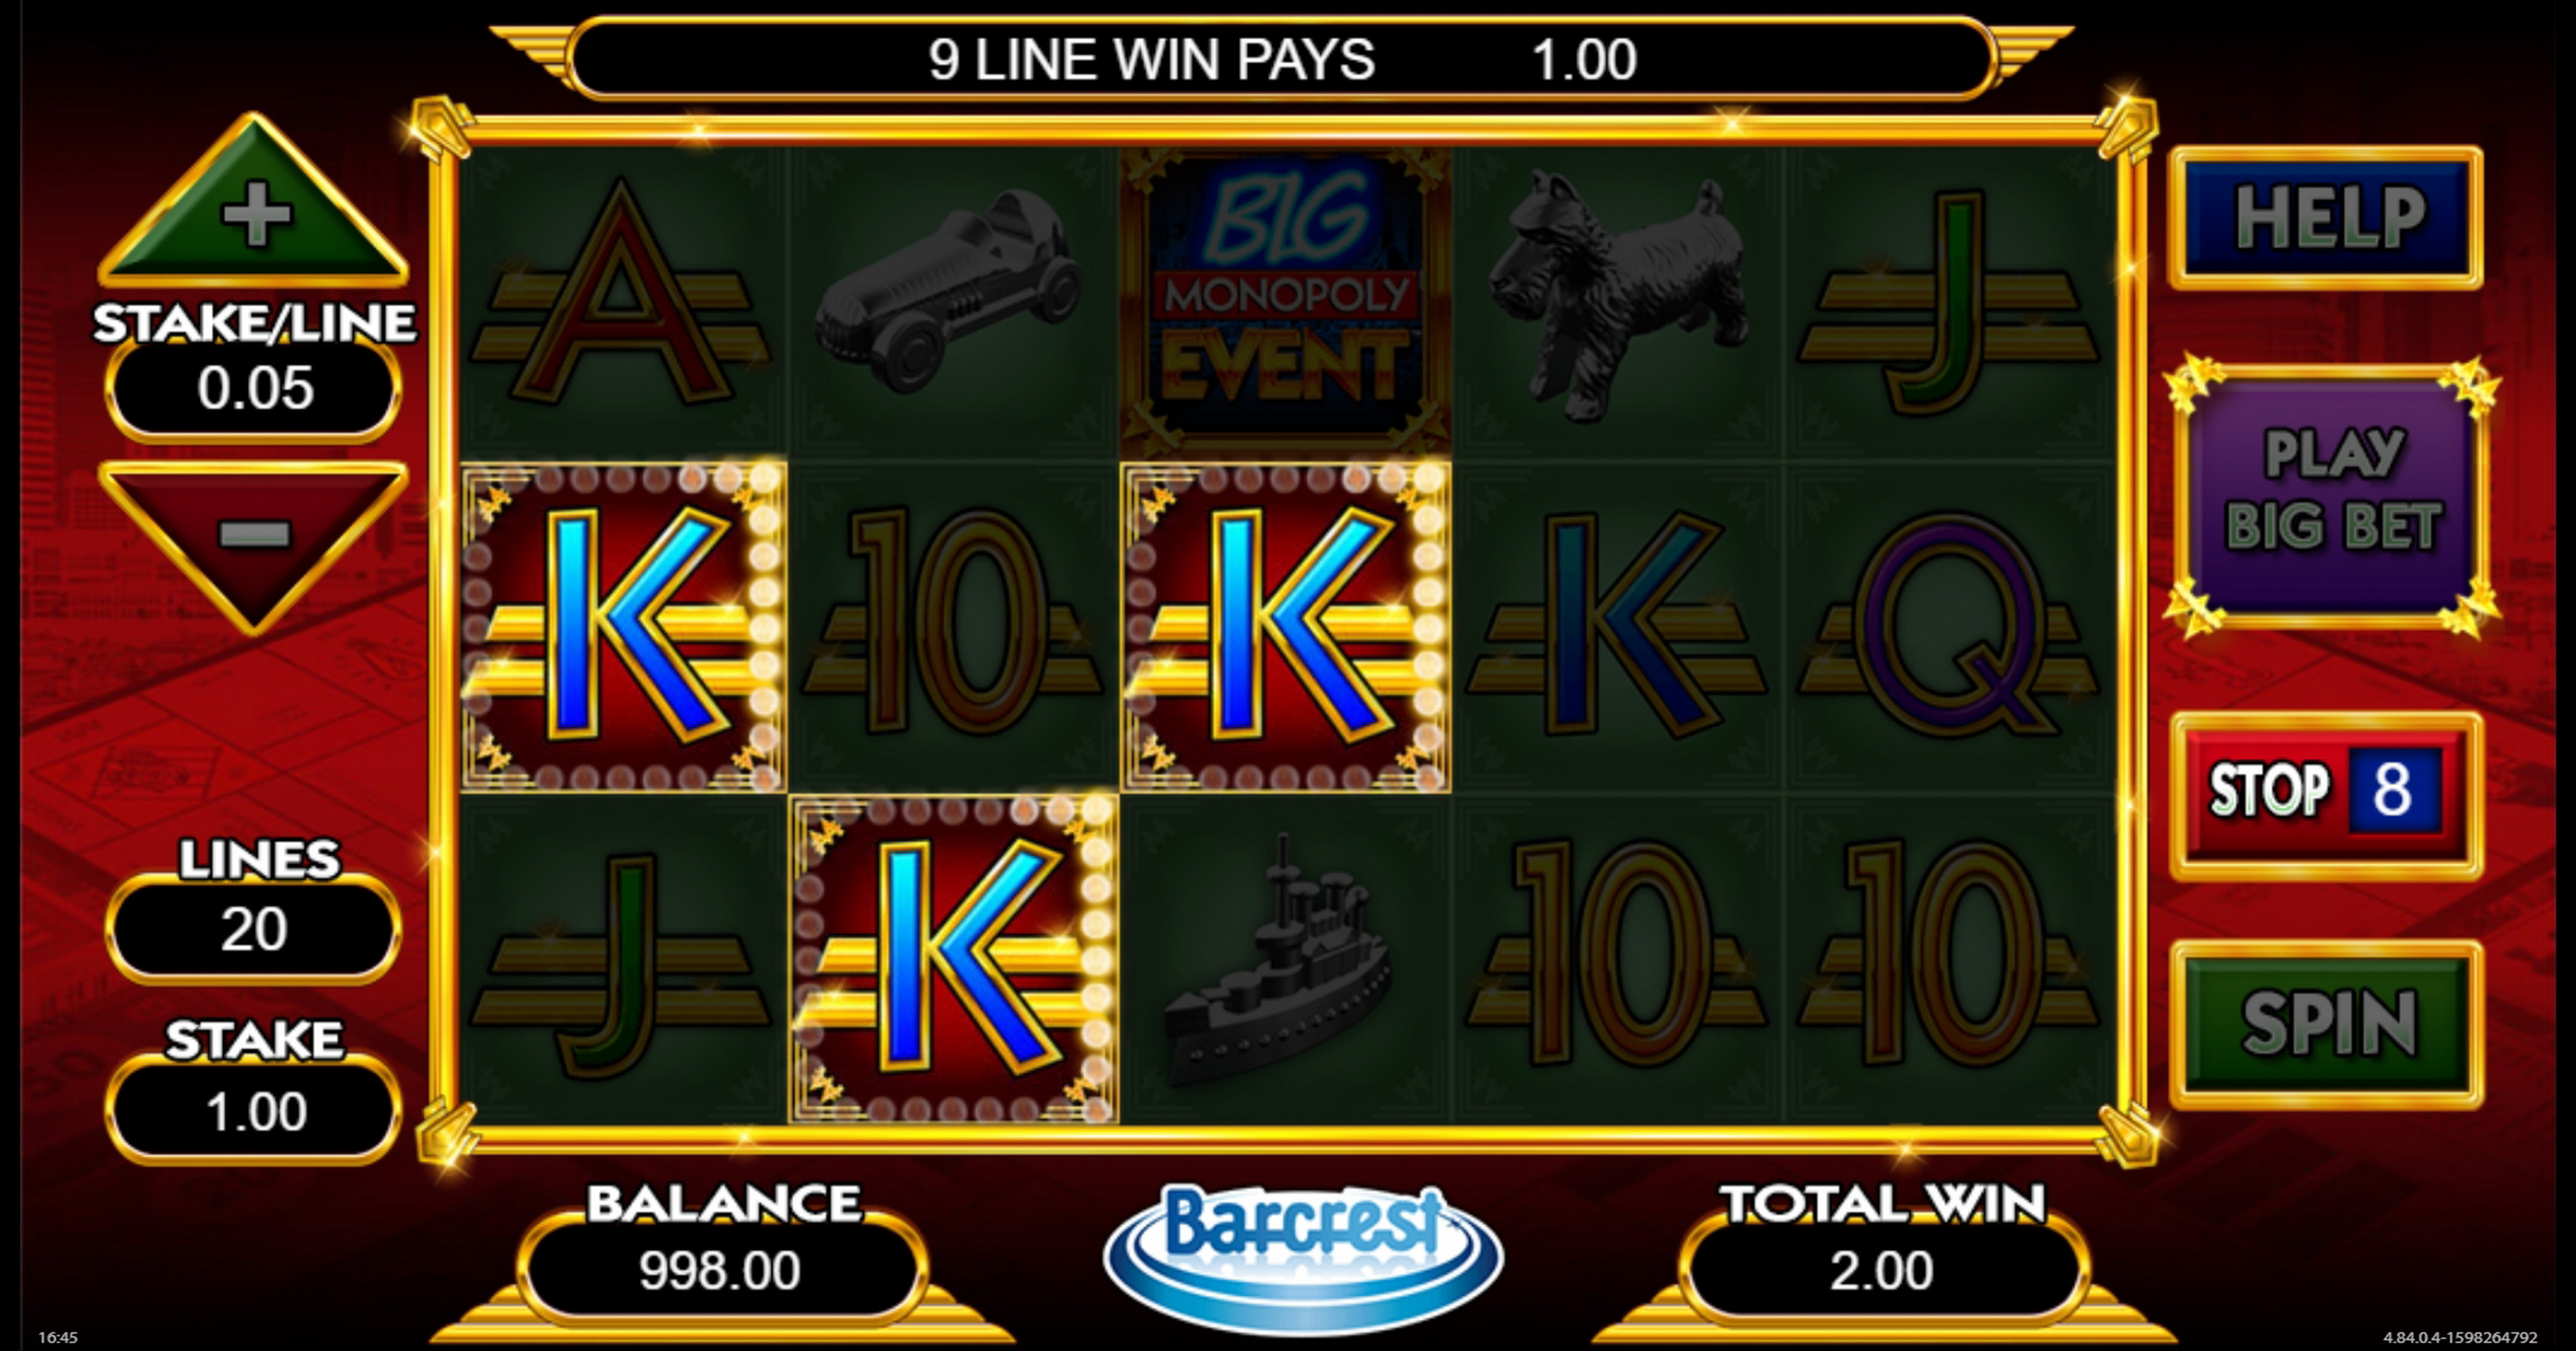 Win Money in MONOPOLY Big Event Free Slot Game by Barcrest Games